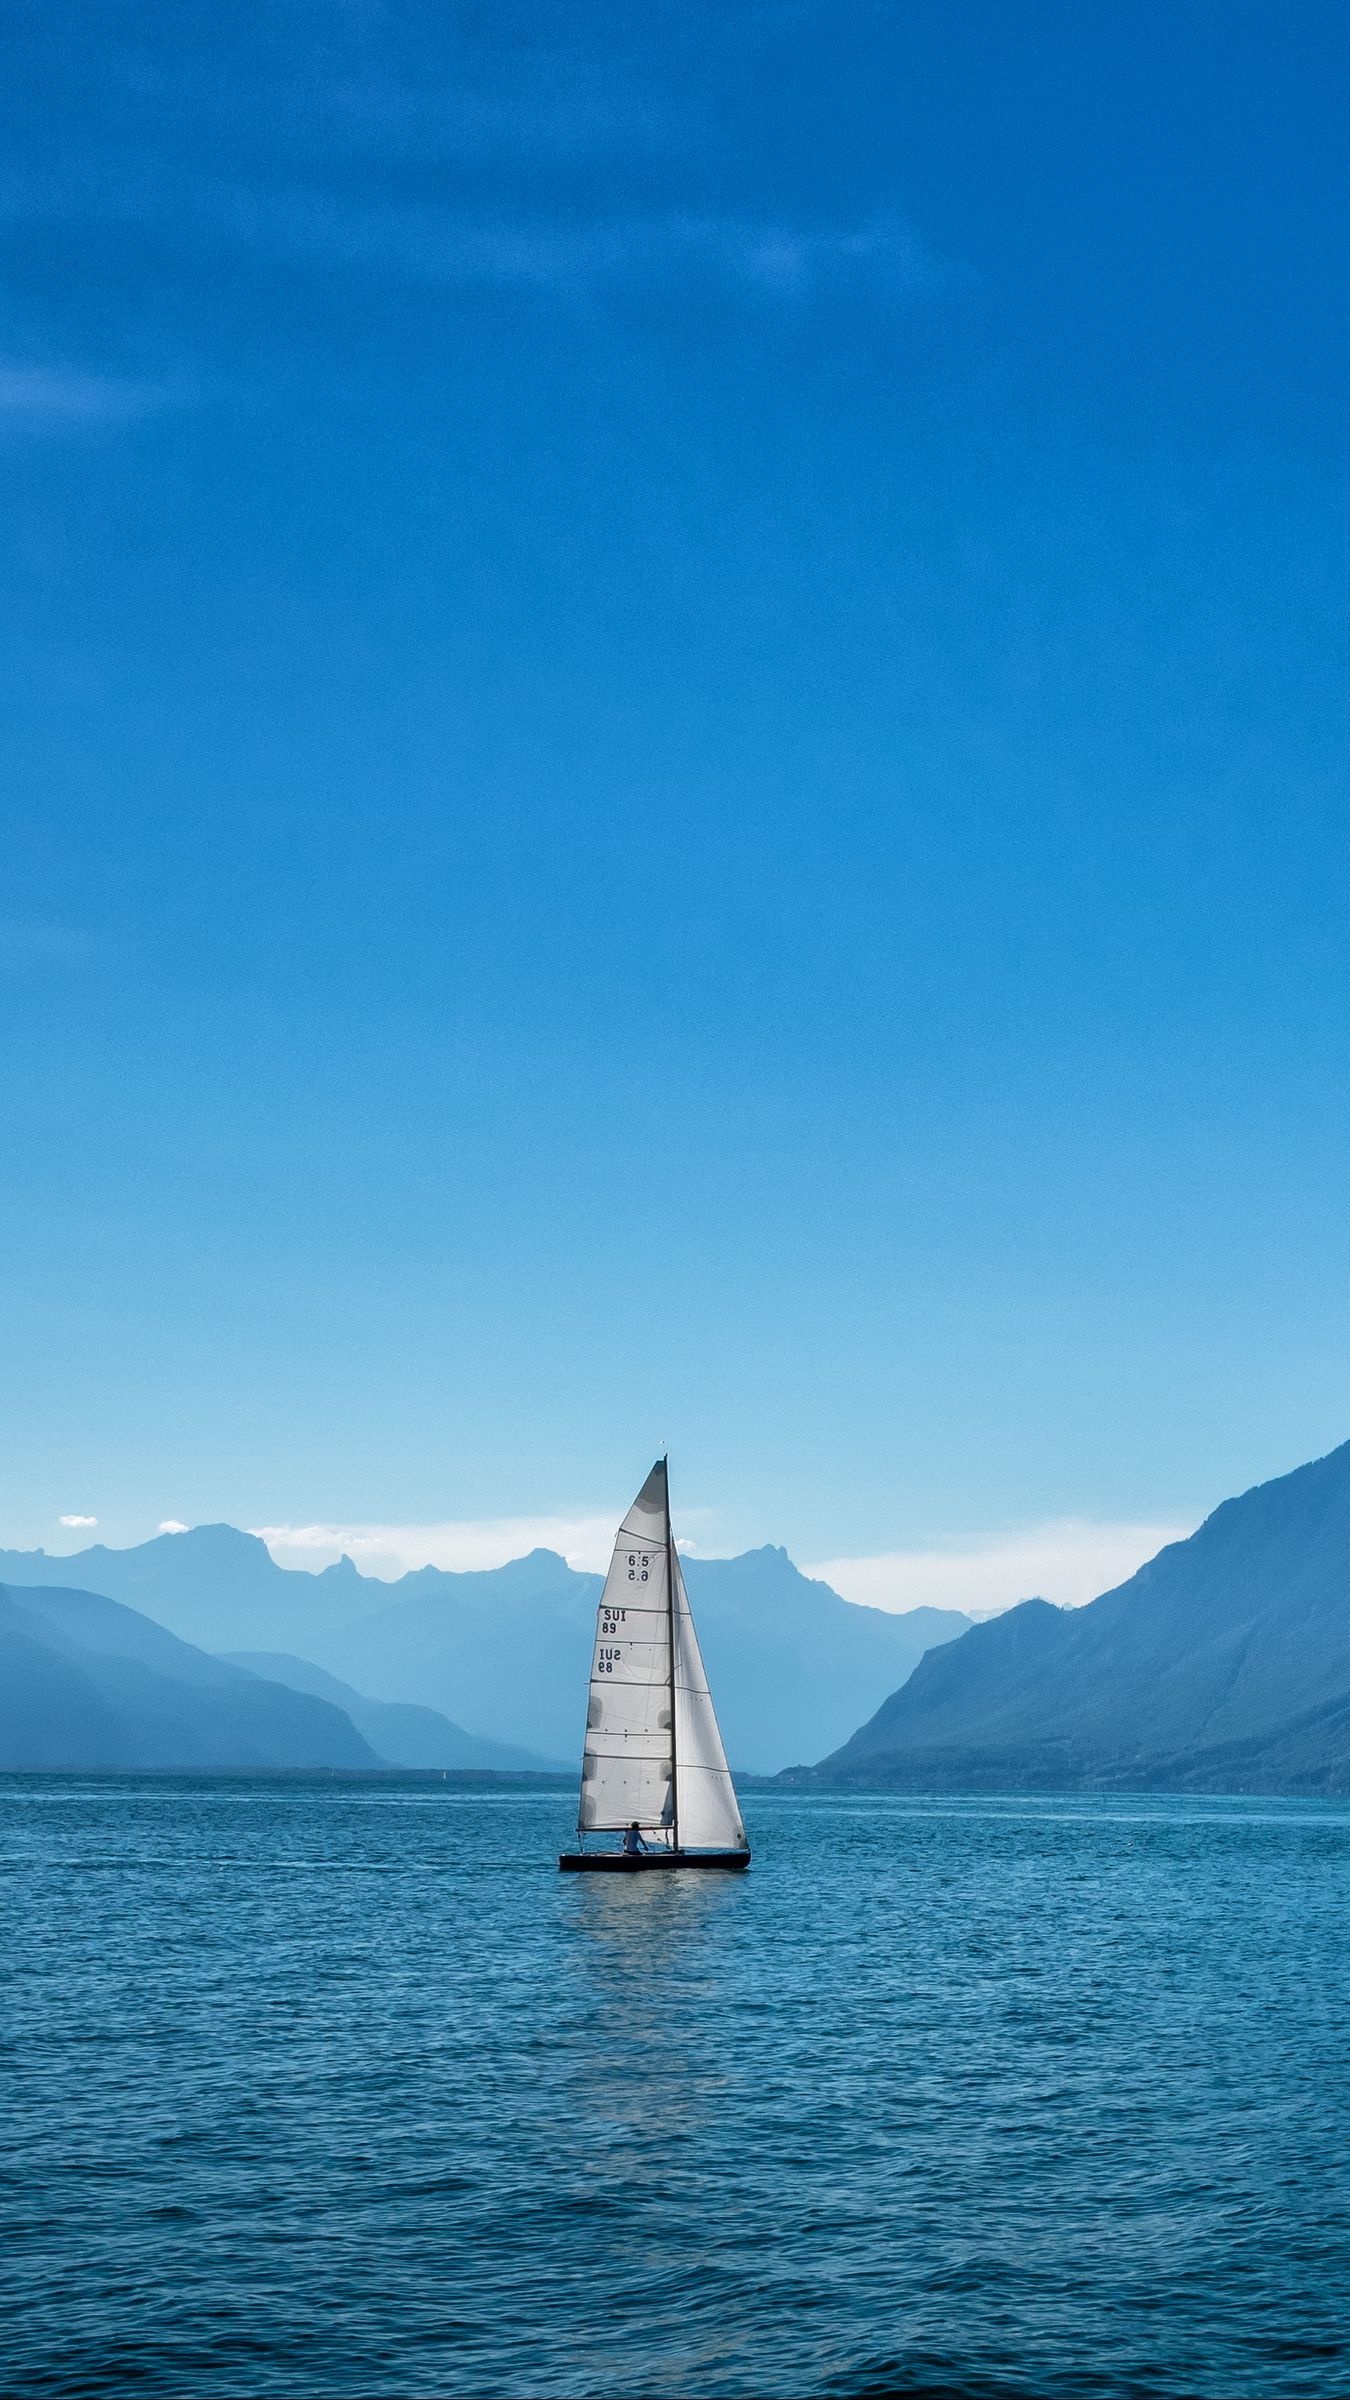 Sailboat iPhone wallpapers, Stylish backgrounds, Nautical design, Mobile elegance, 1350x2400 HD Phone